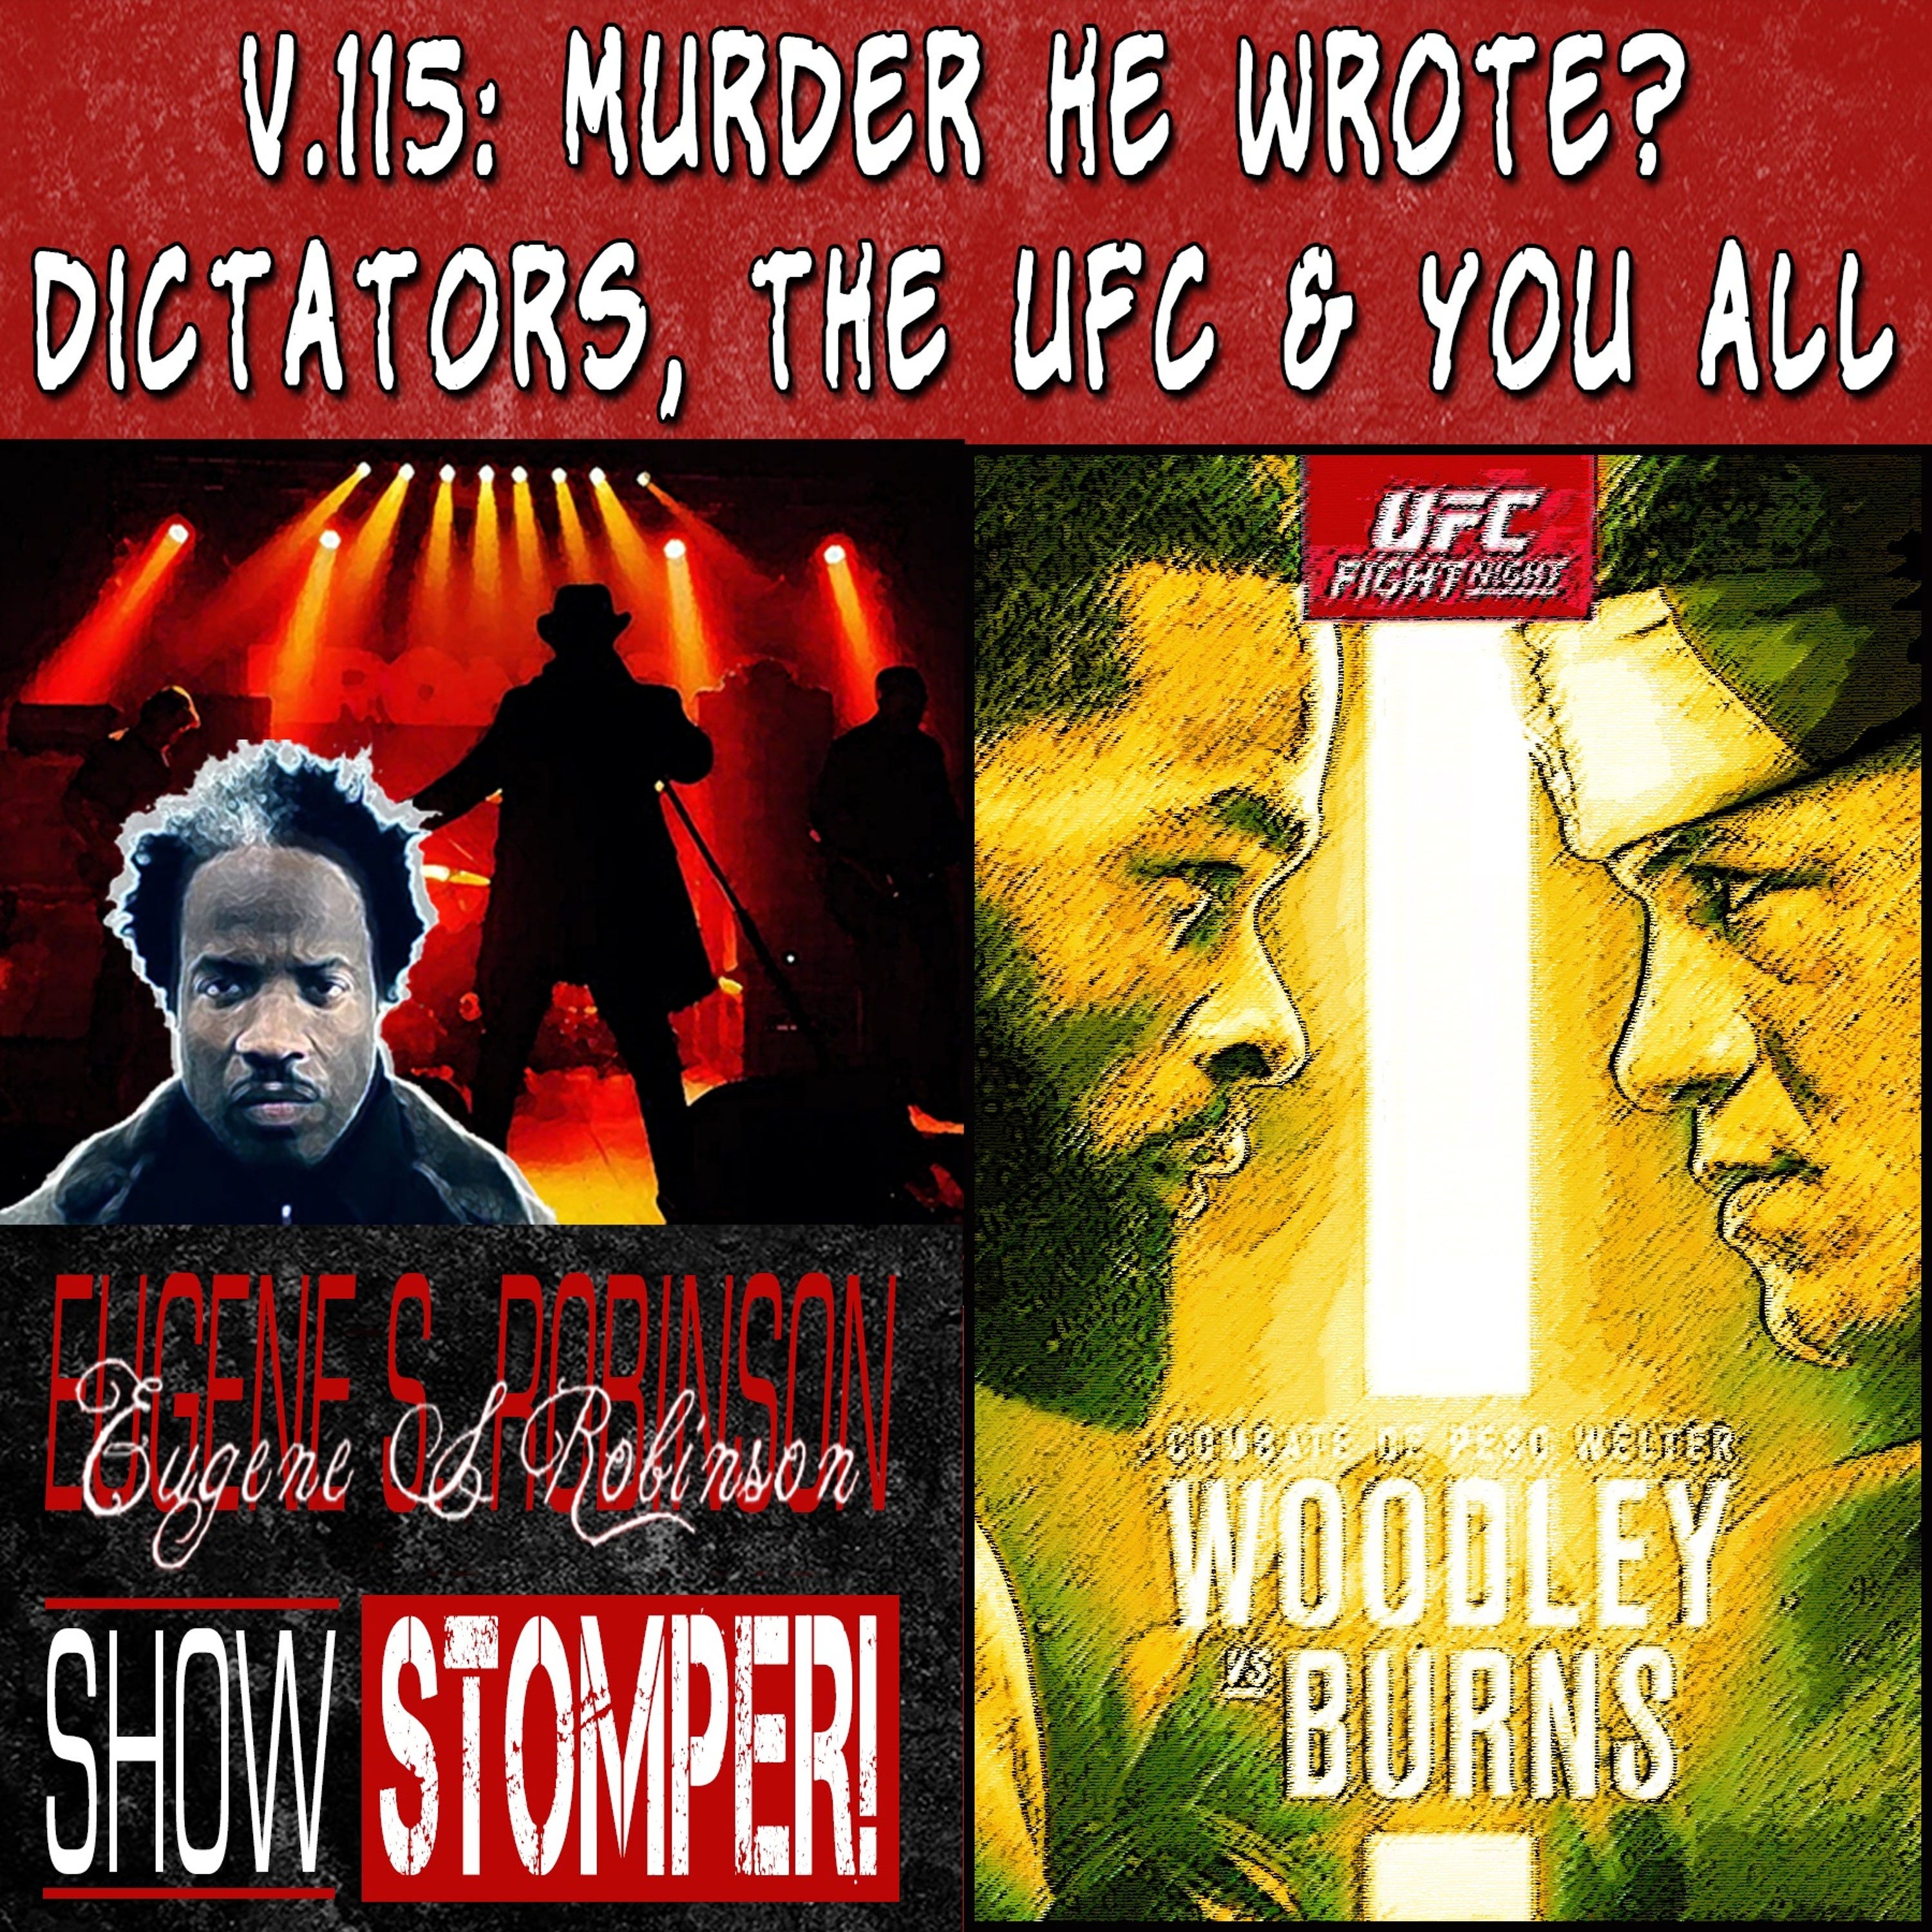 V.115: Murder He Wrote? Dictators, the UFC + You All on the Eugene S. Robinson Show Stomper!